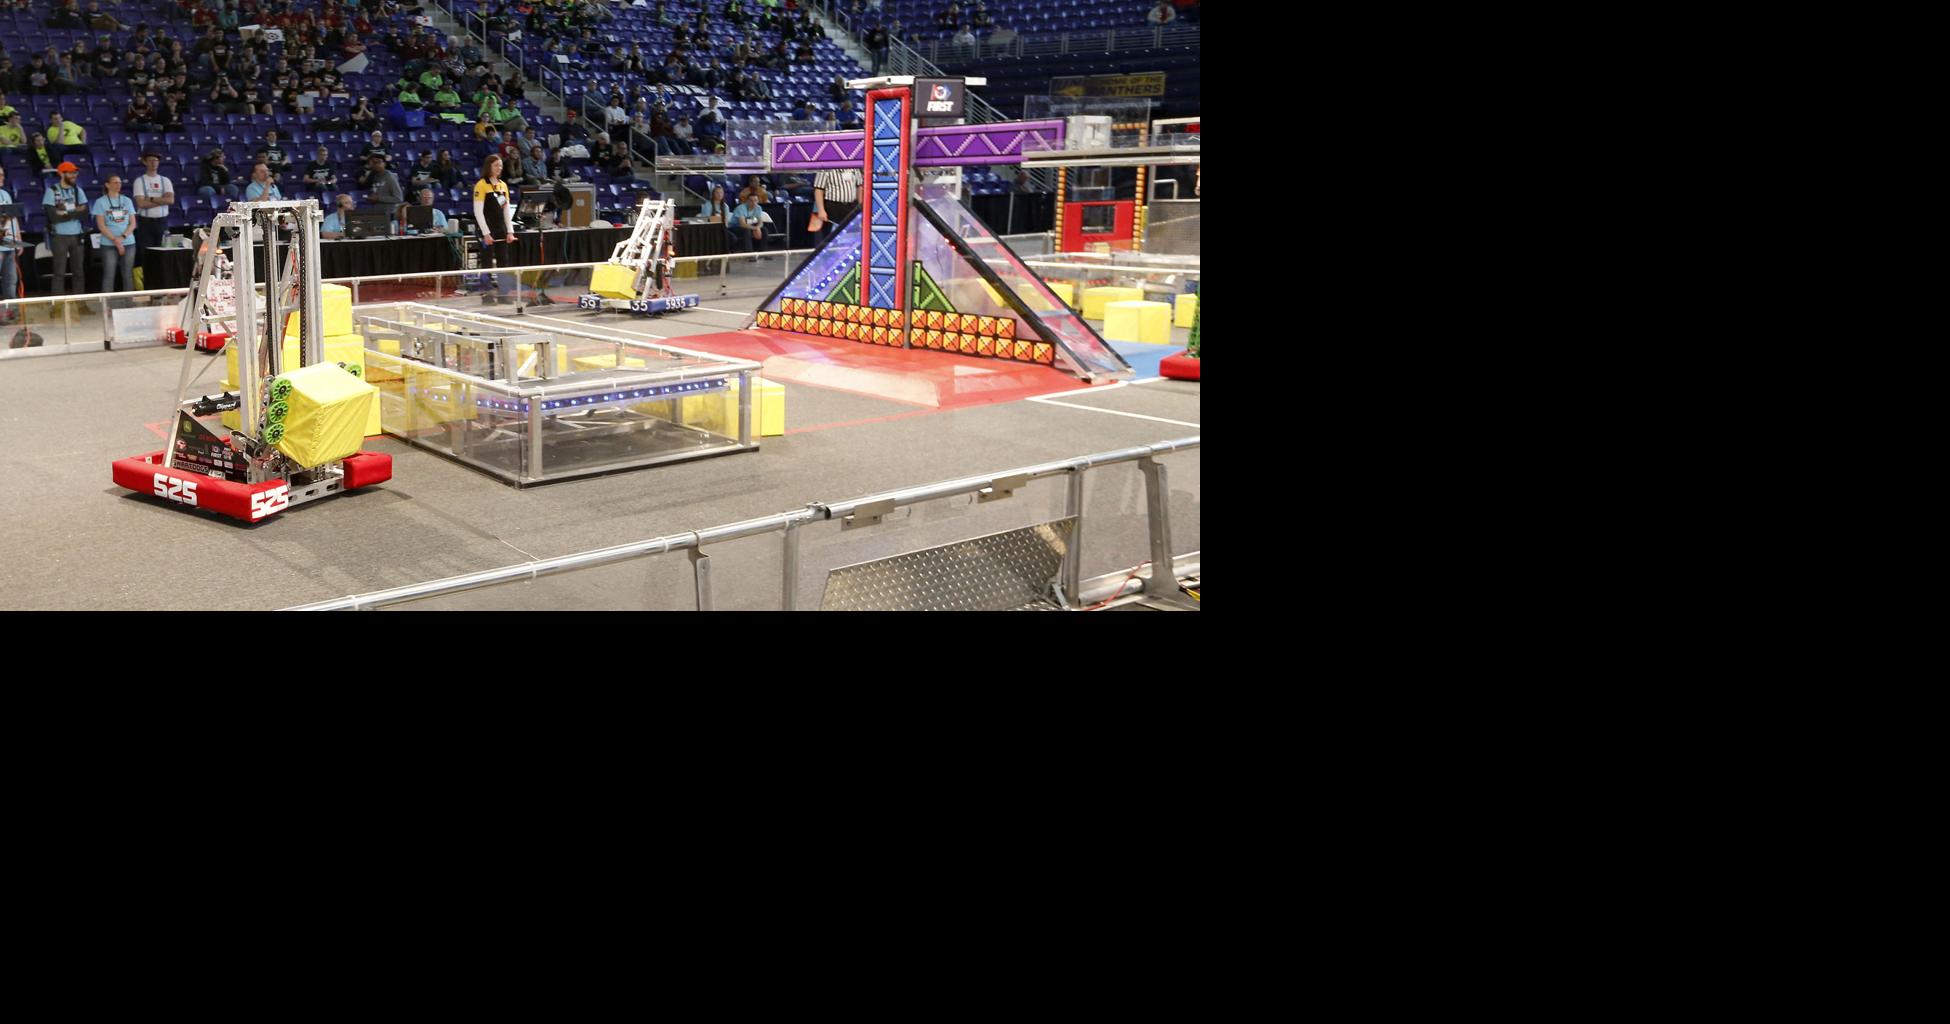 FIRST Robotics Competition returning to the McLeod Center after two ...